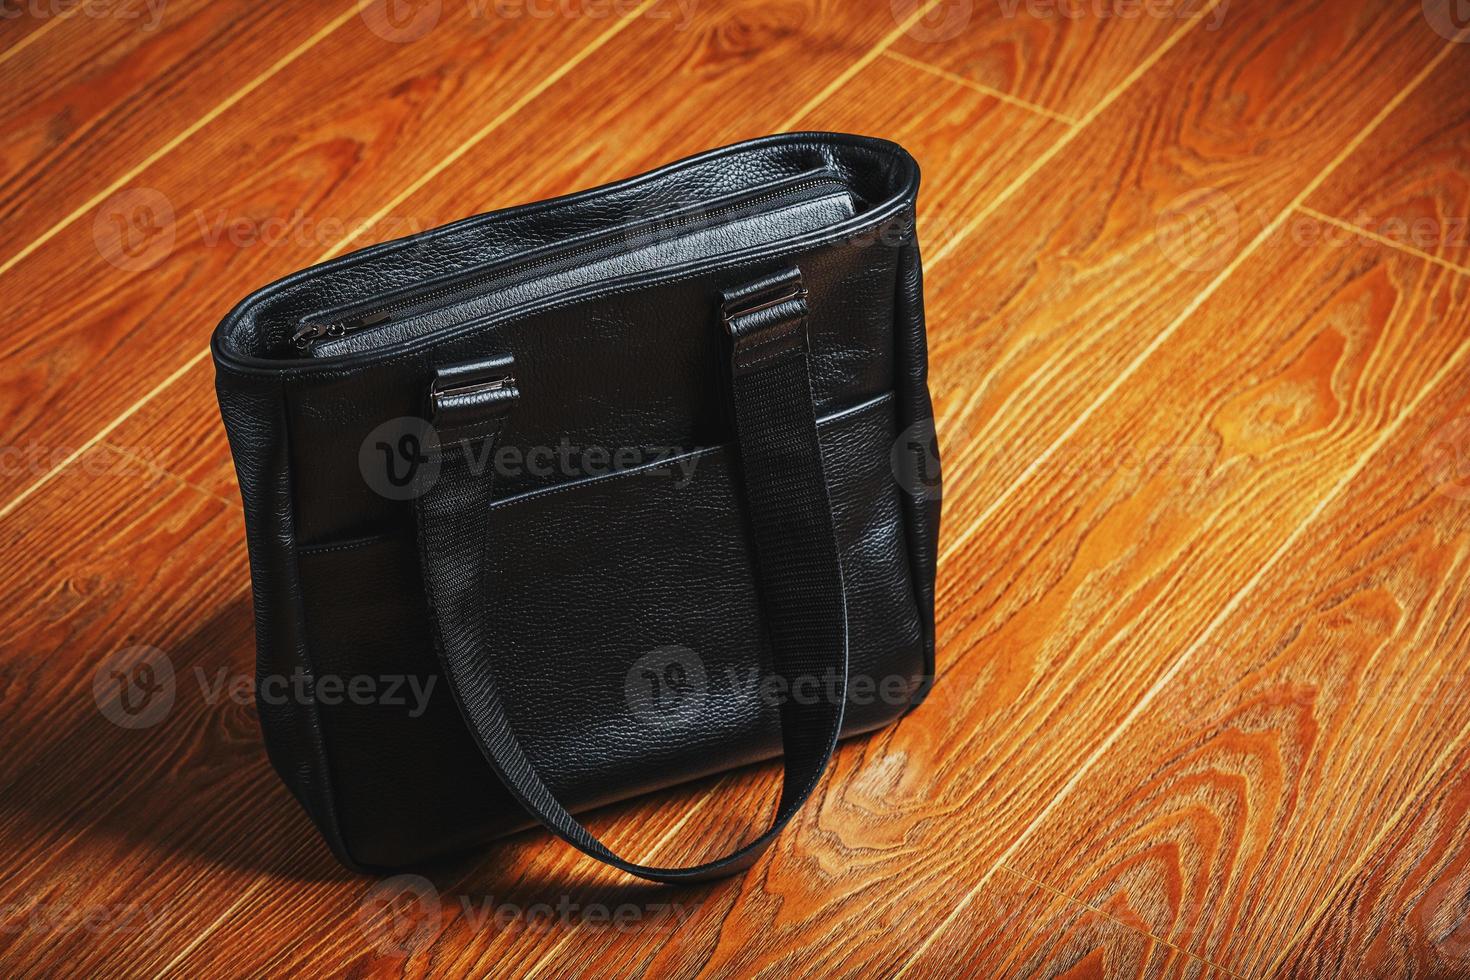 Handmade black leather bag on a wooden background, made of natural material. photo